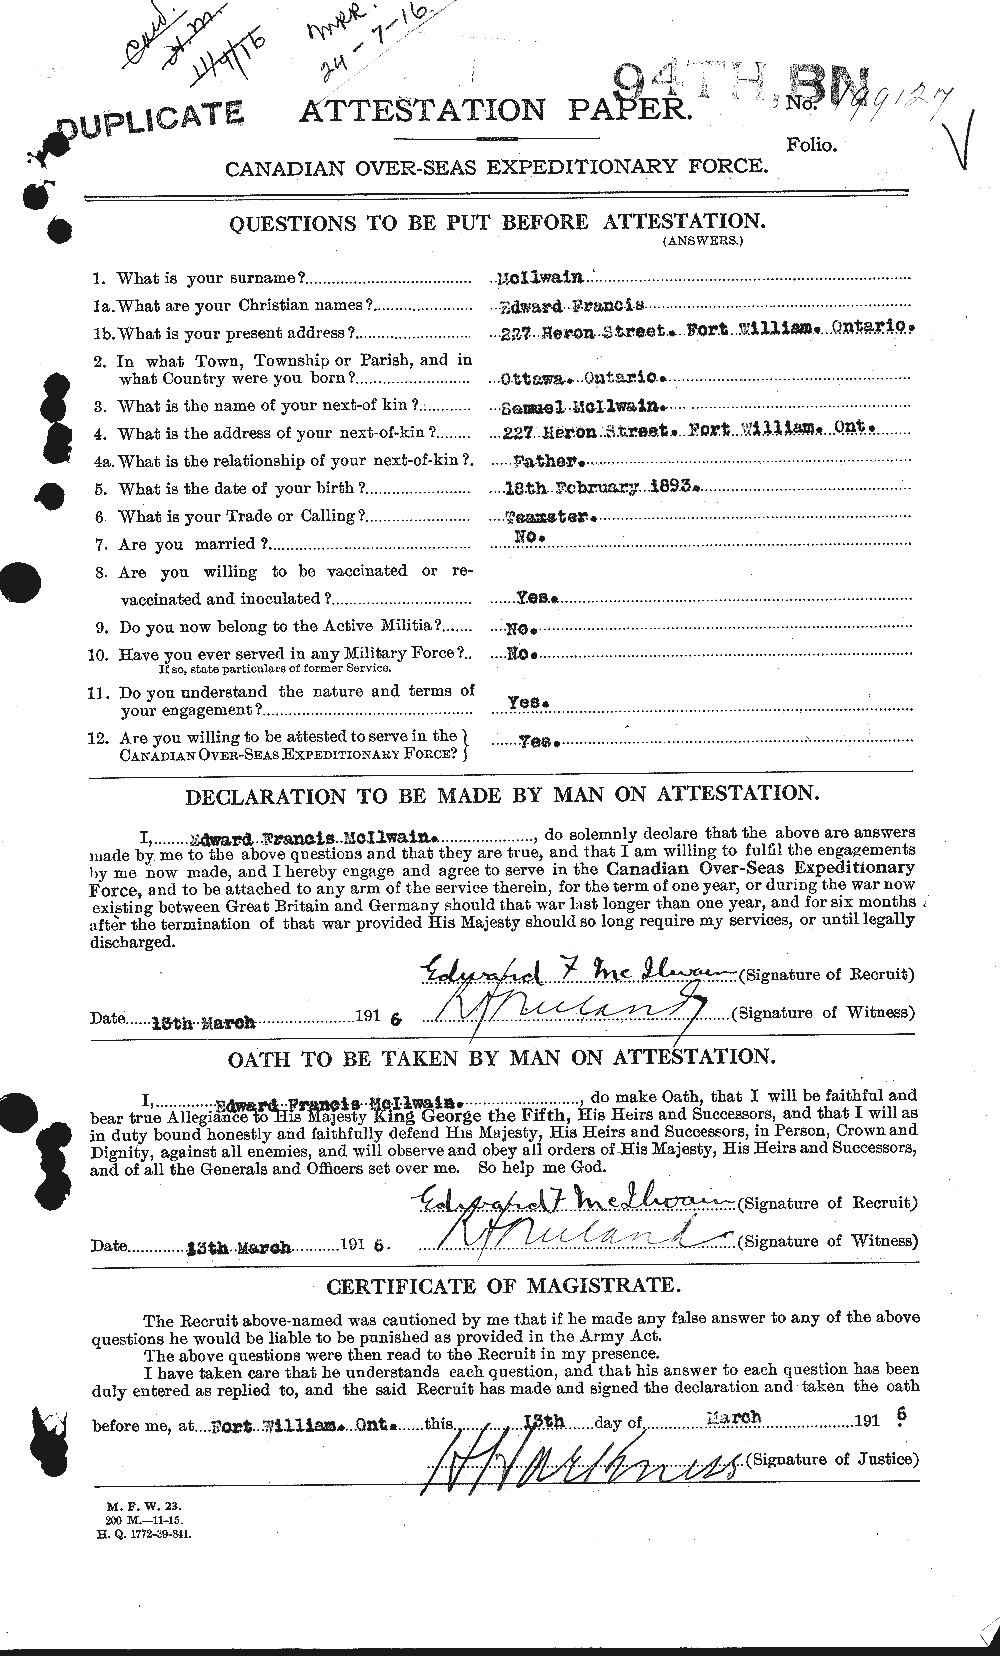 Personnel Records of the First World War - CEF 526496a